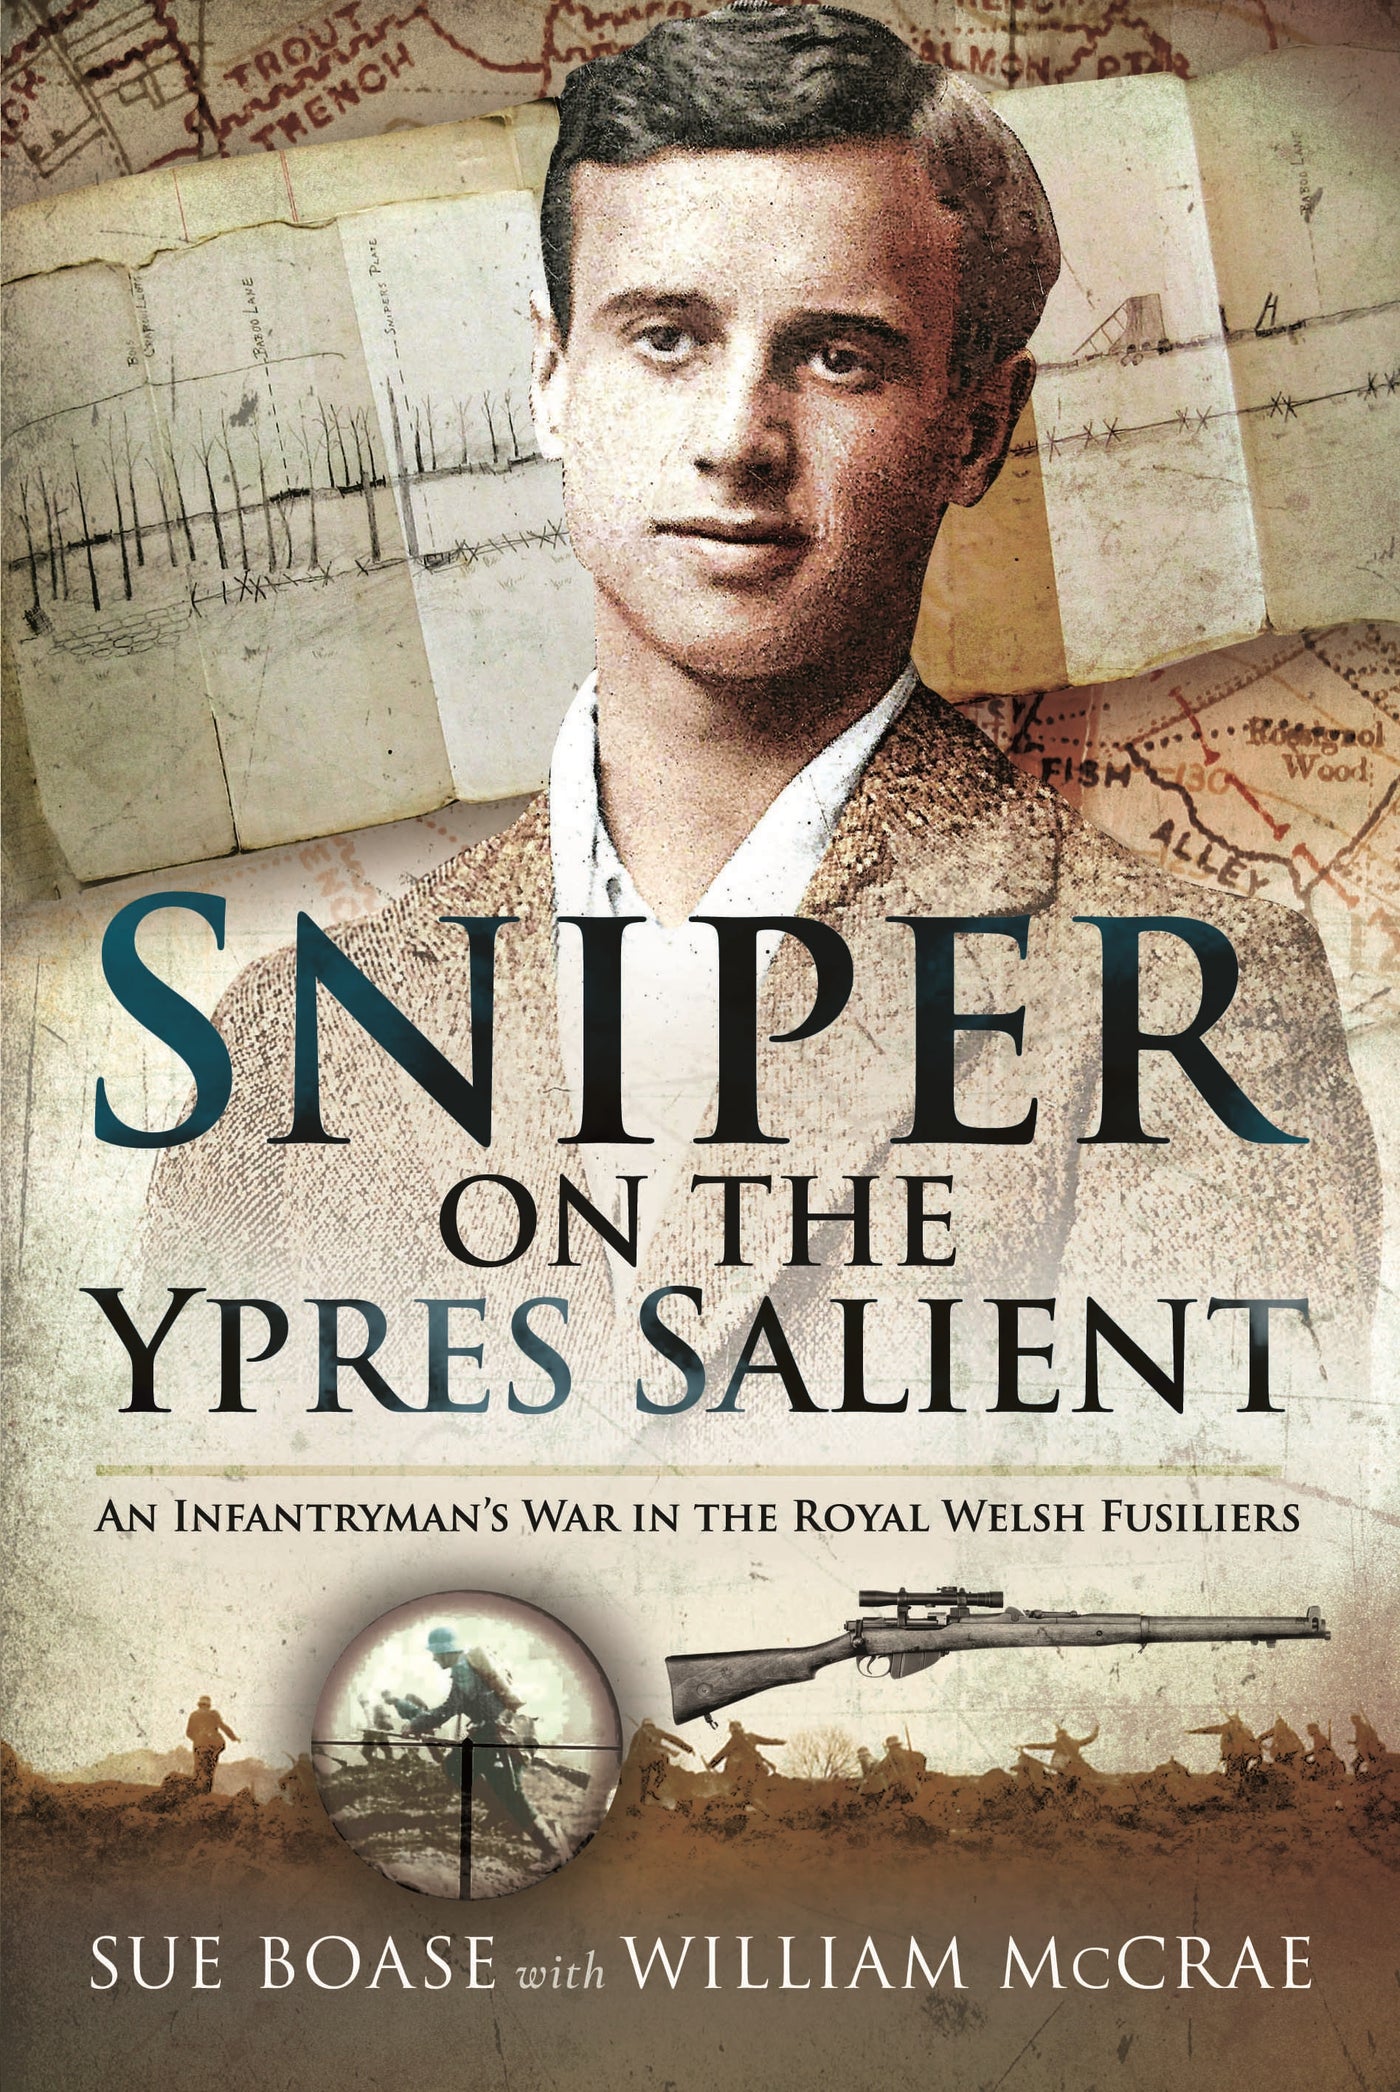 Sniper on the Ypres Salient